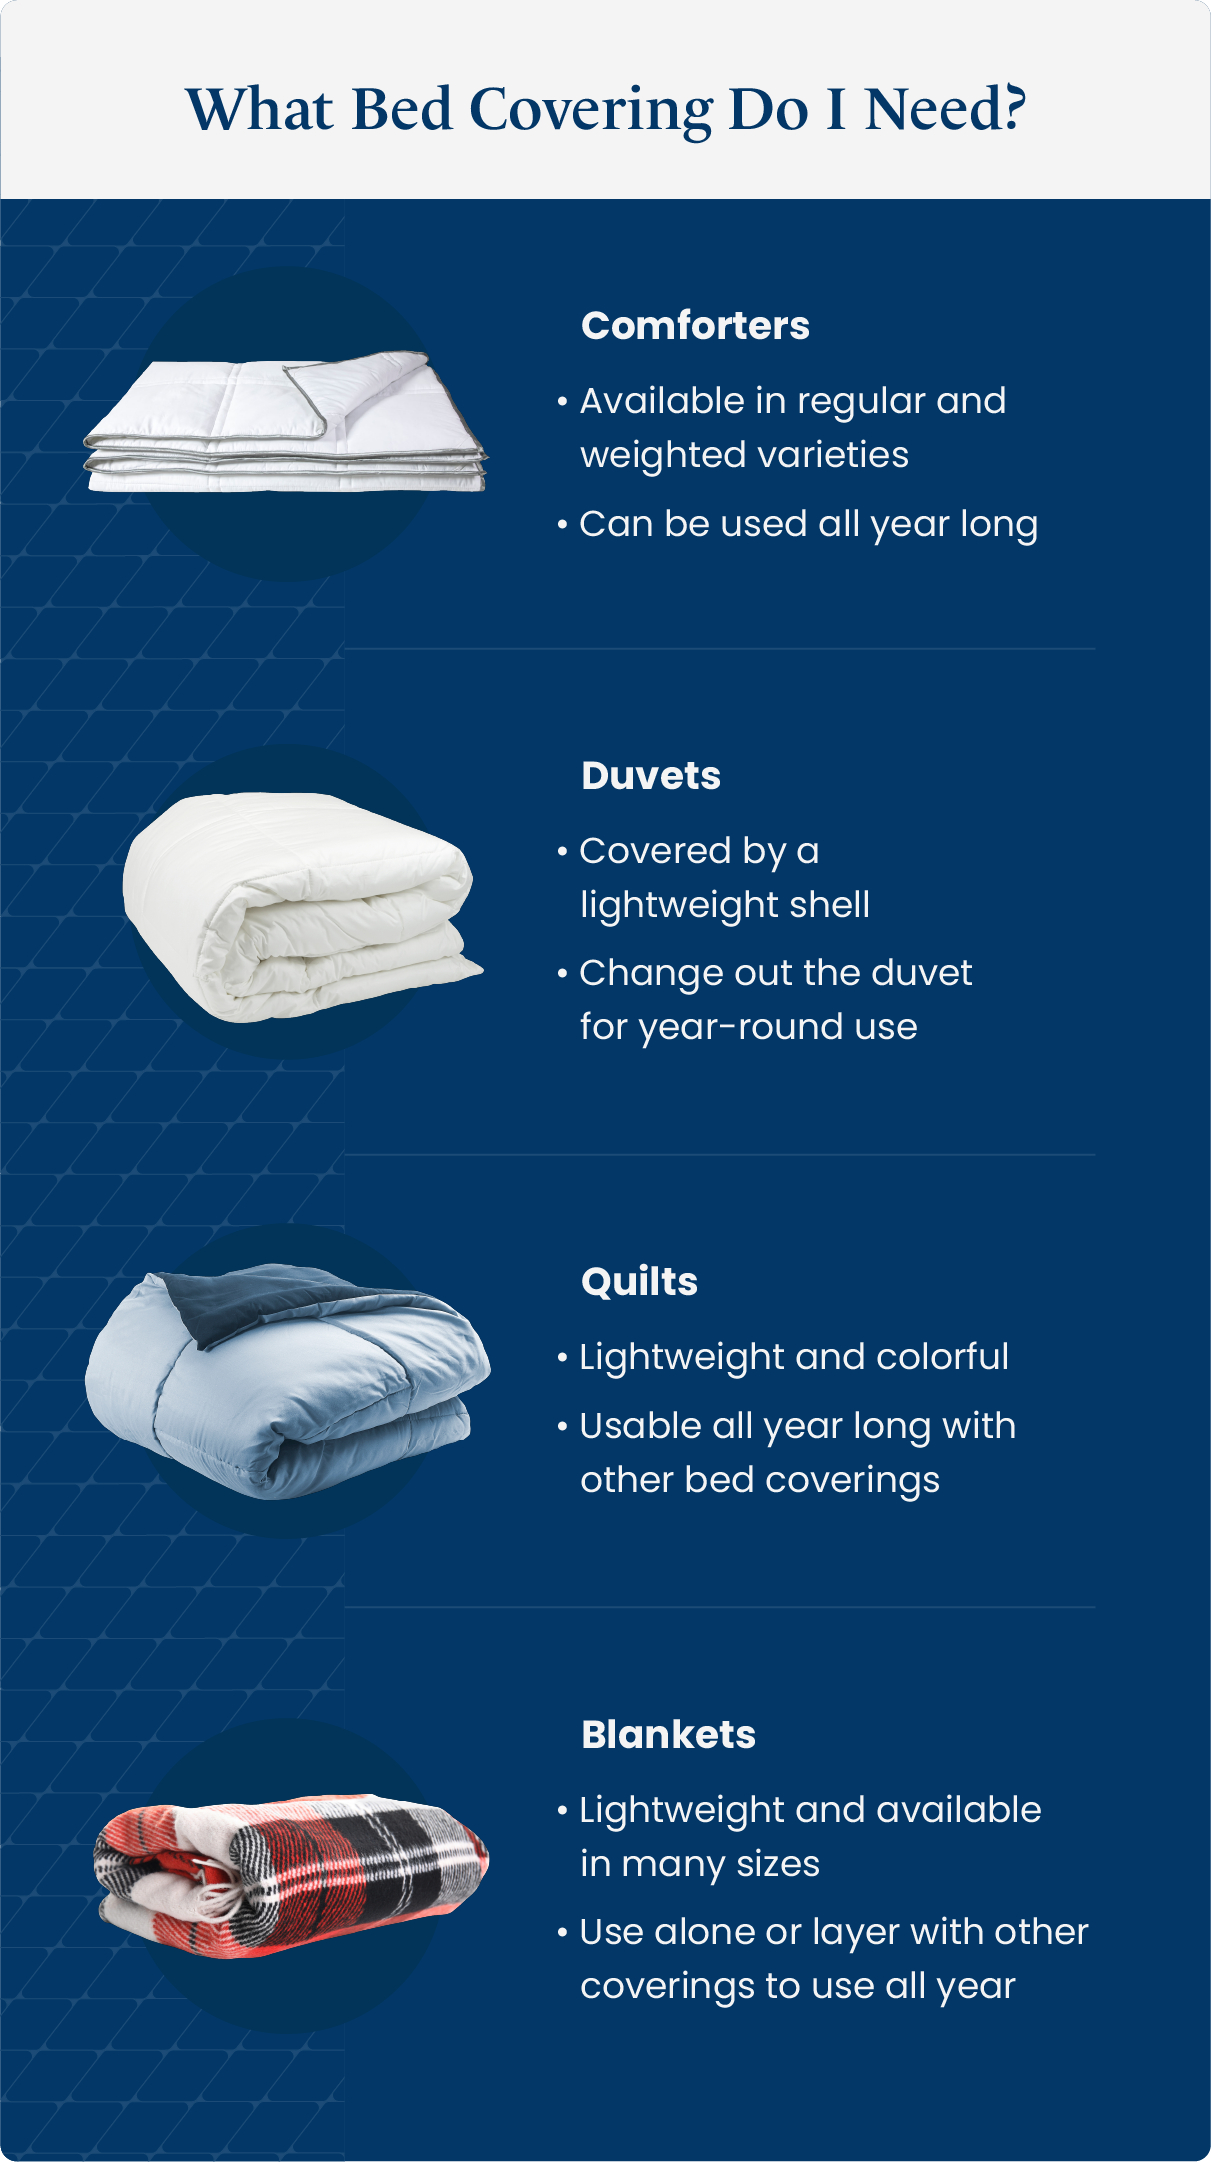 A chart explaining the differences between comforters, duvets, quilts, and blankets.